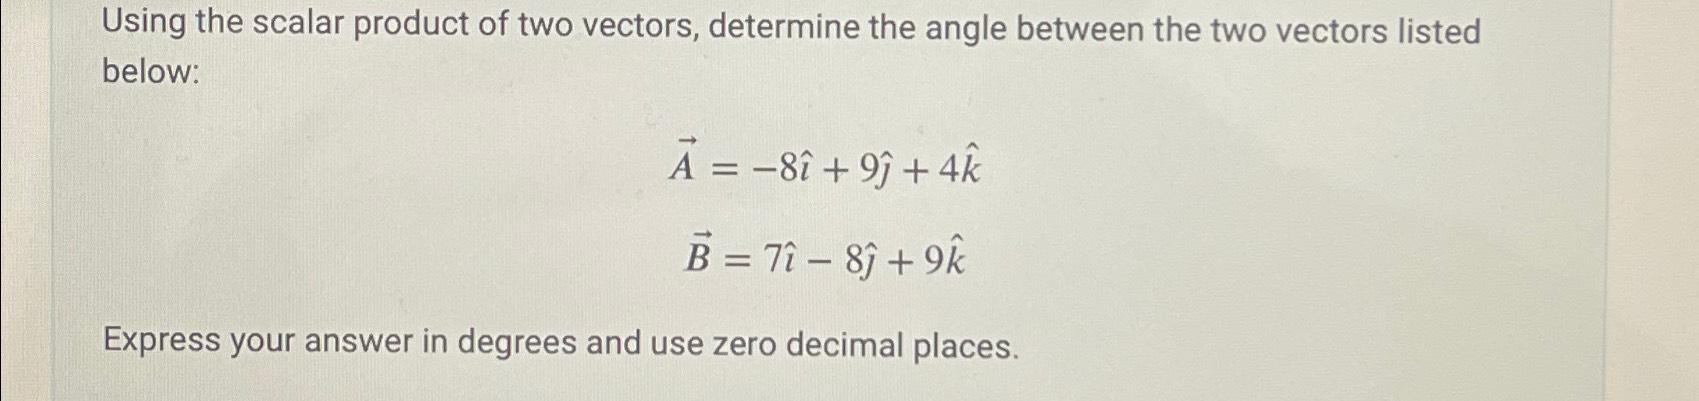 Using the scalar product of two vectors, determine the angle between the two vectors listed below: A = -8 +